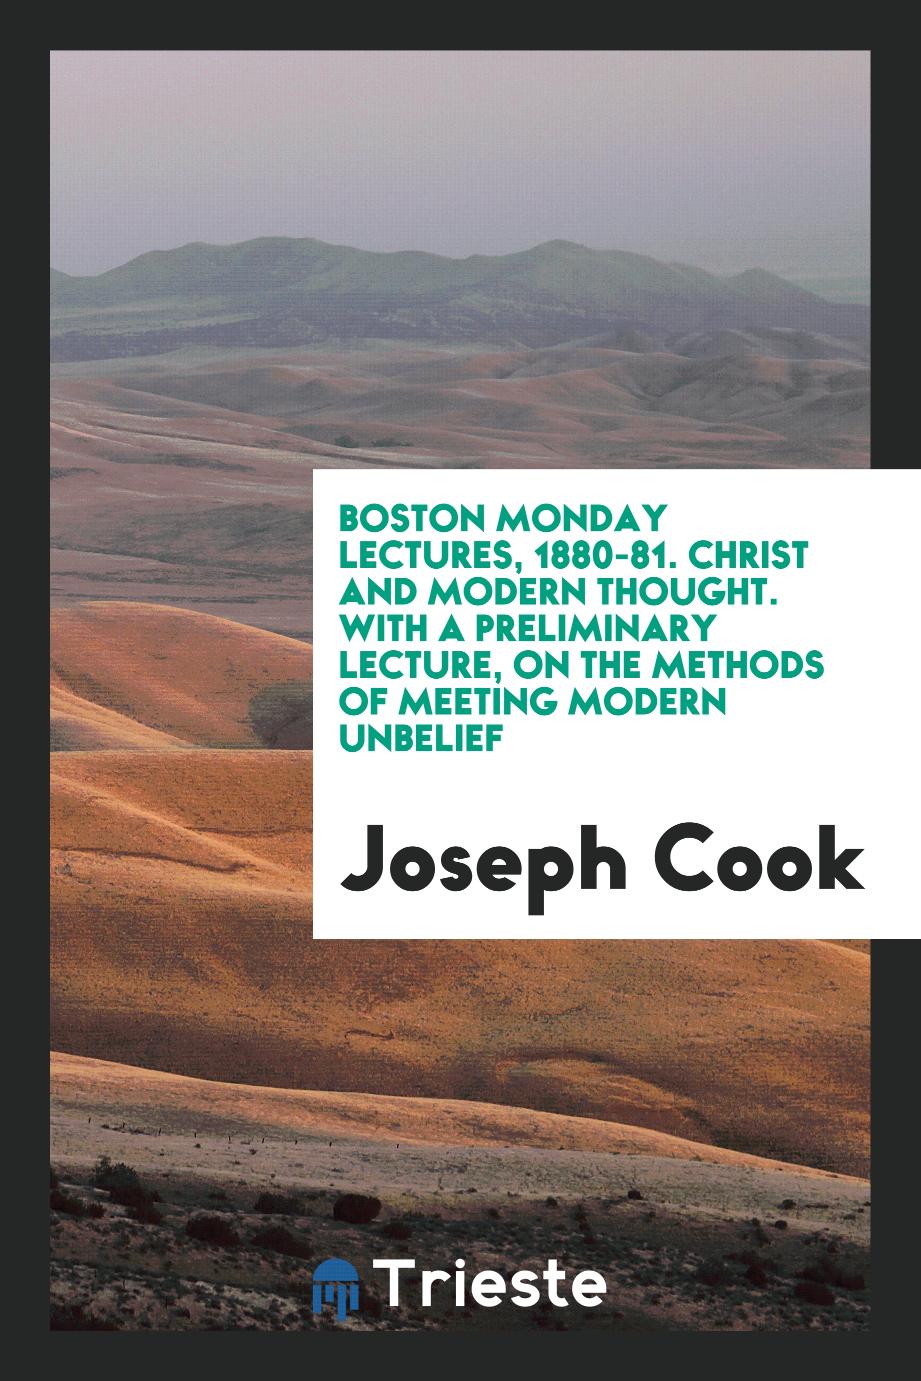 Boston Monday Lectures, 1880-81. Christ and Modern Thought. With a Preliminary Lecture, on the Methods of Meeting Modern Unbelief